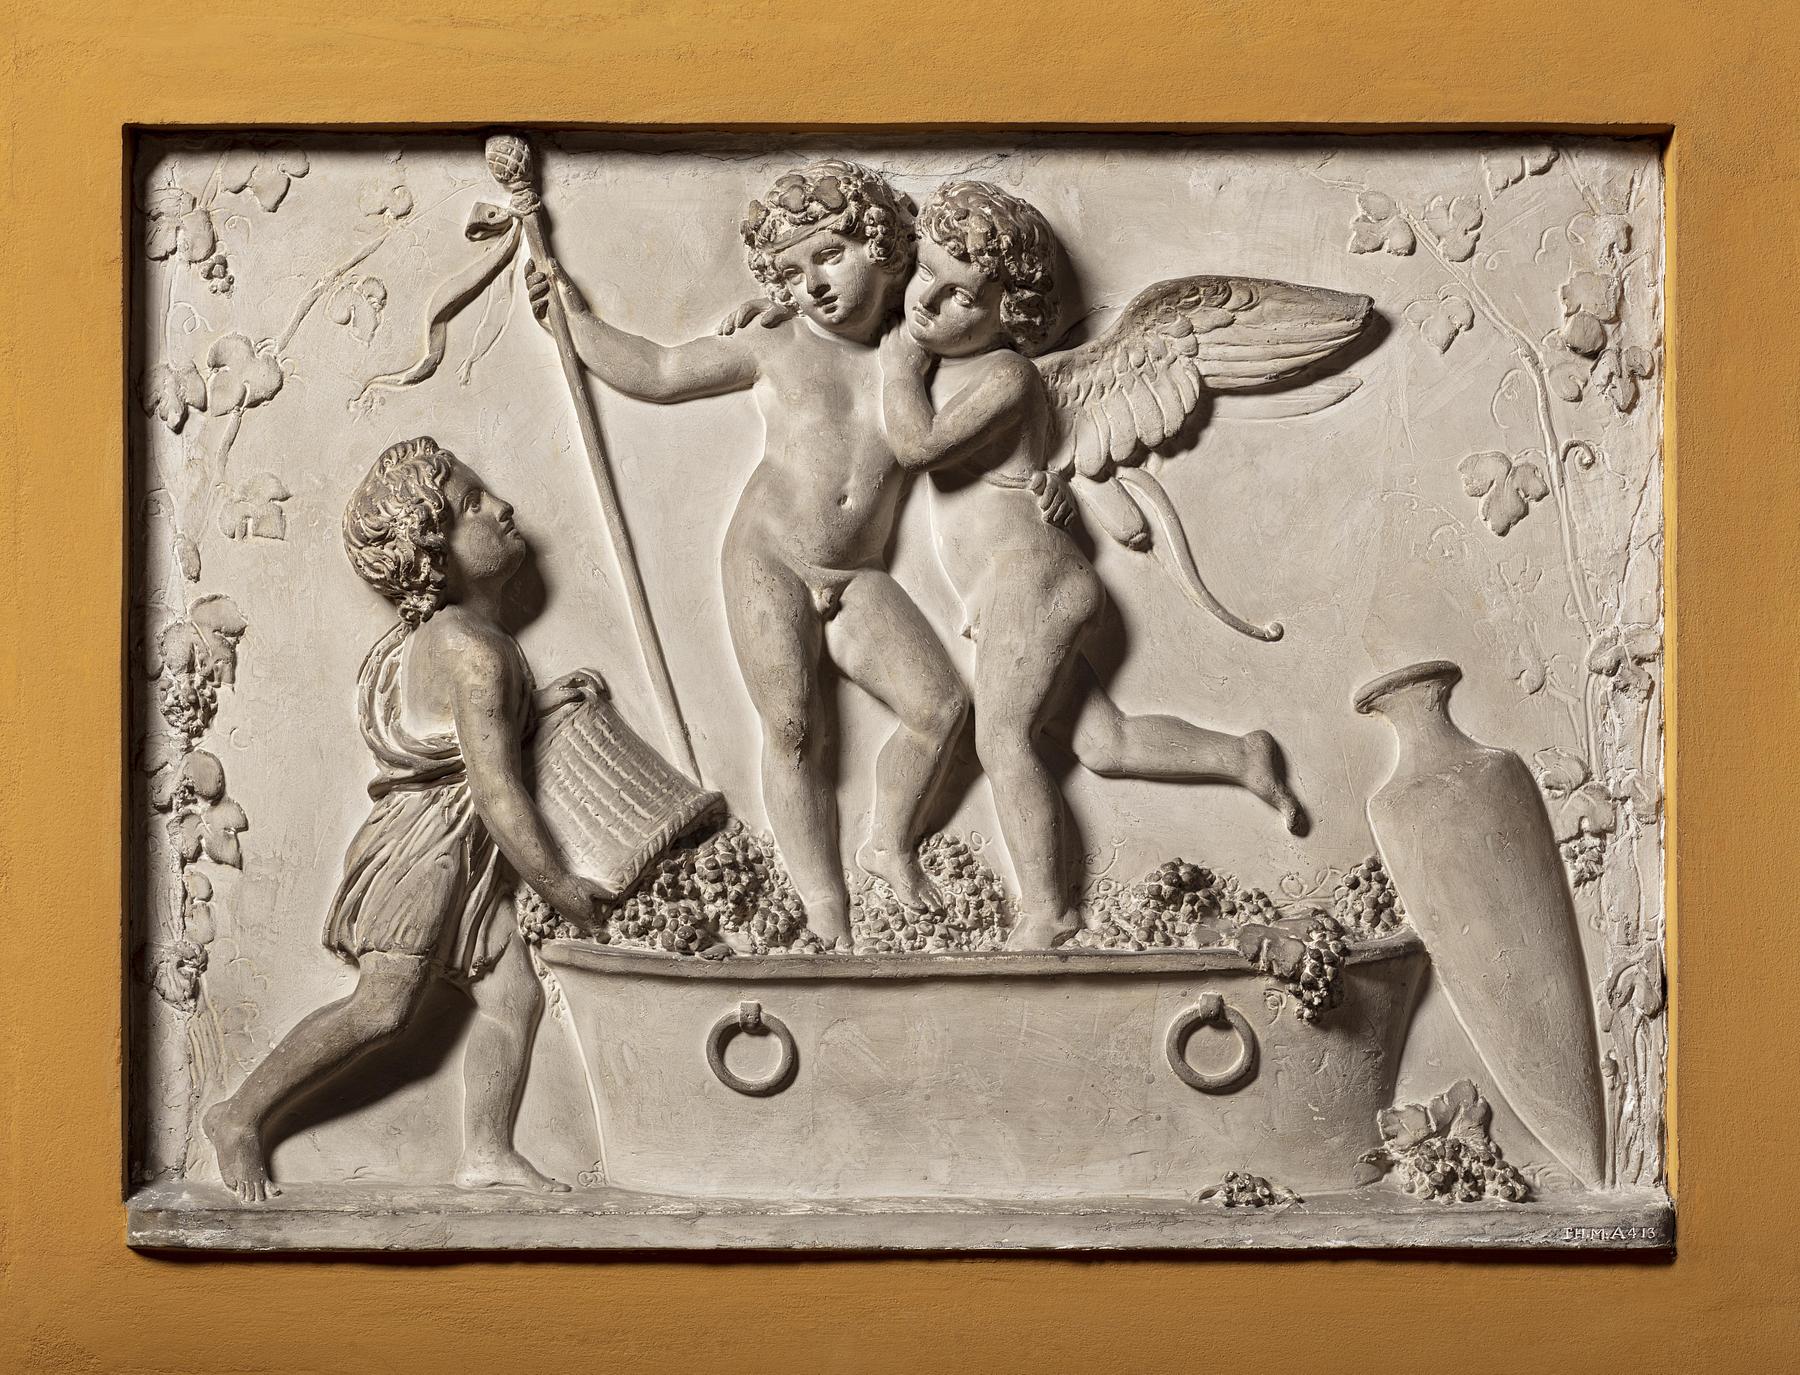 Cupid and Bacchus Stomp Grapes, Autumn, A413